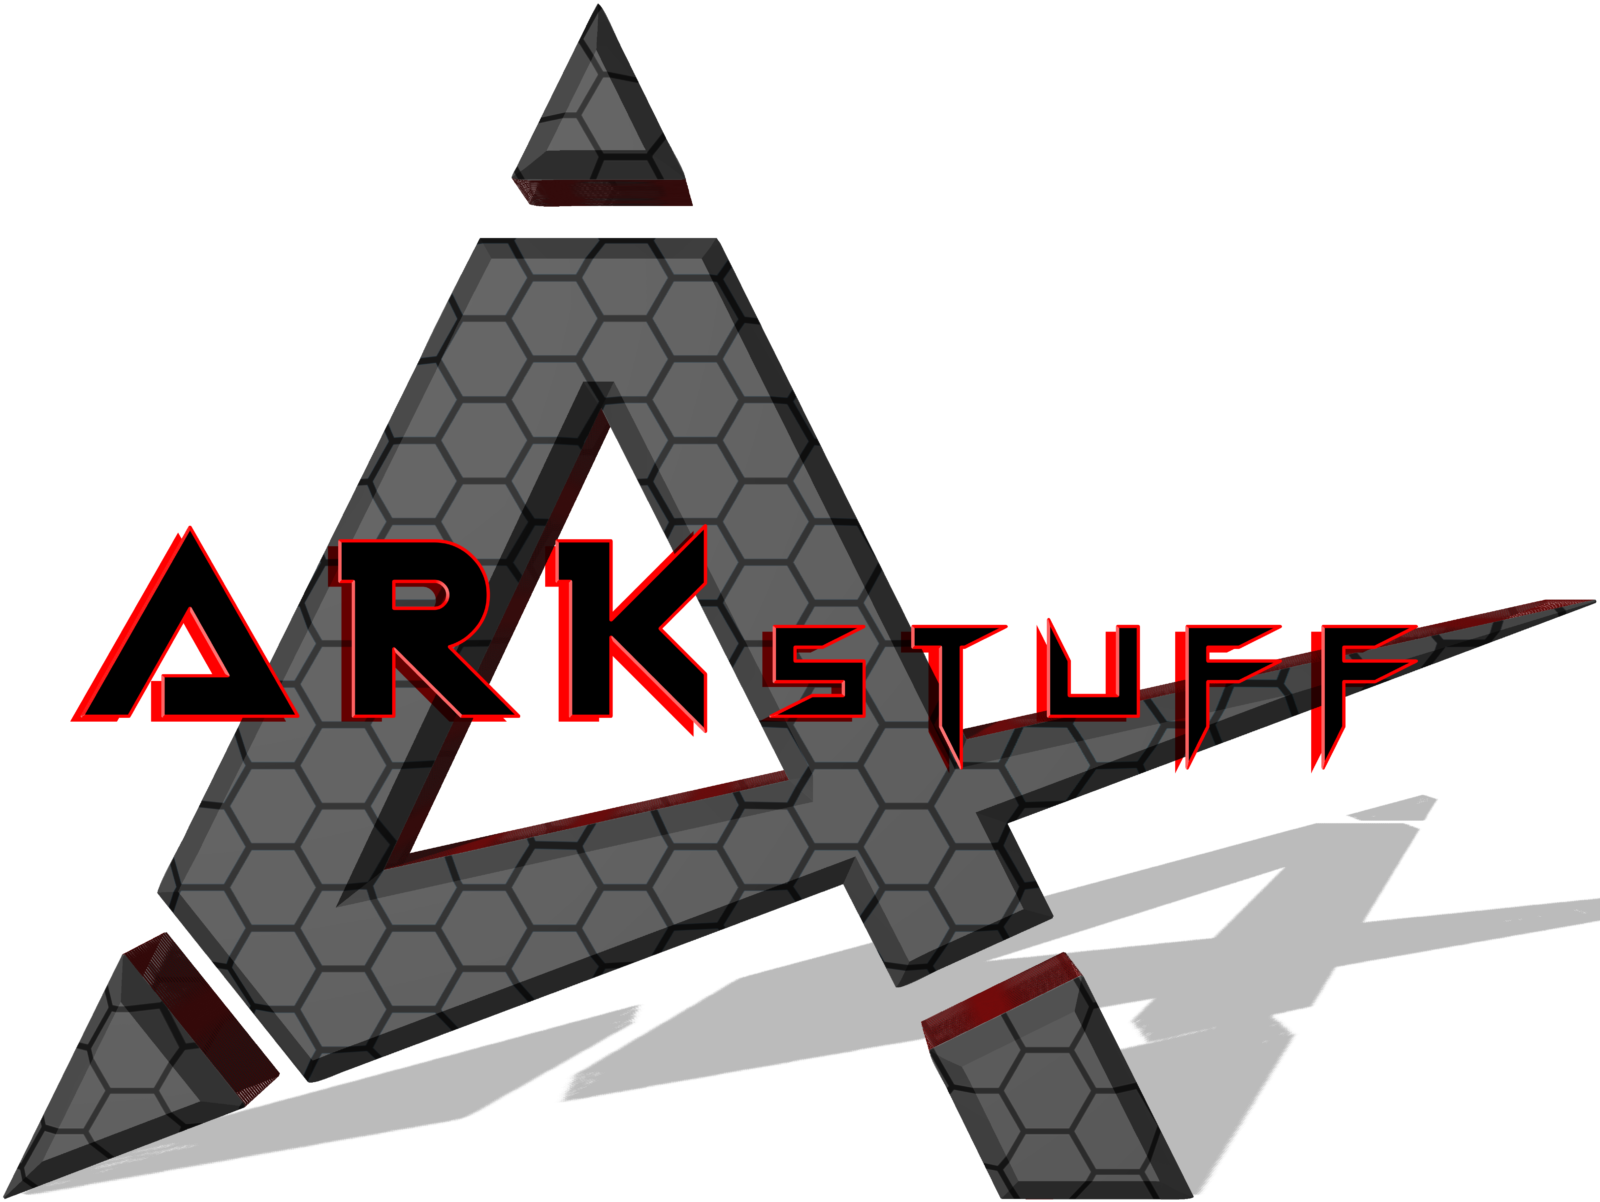 ark latest version of all mod content